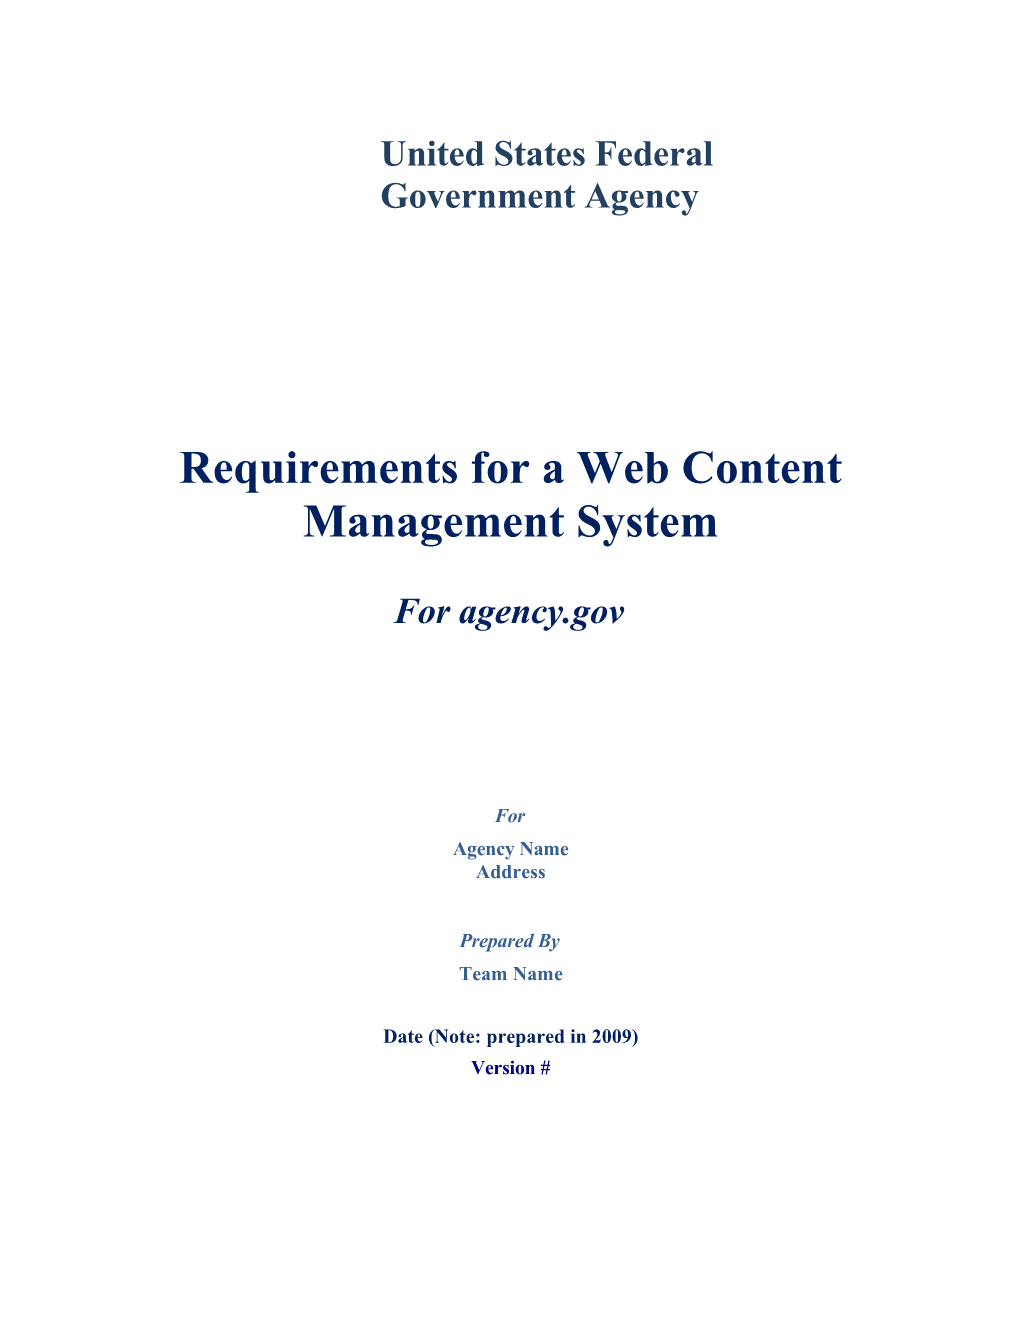 Requirements for a Web Content Management System